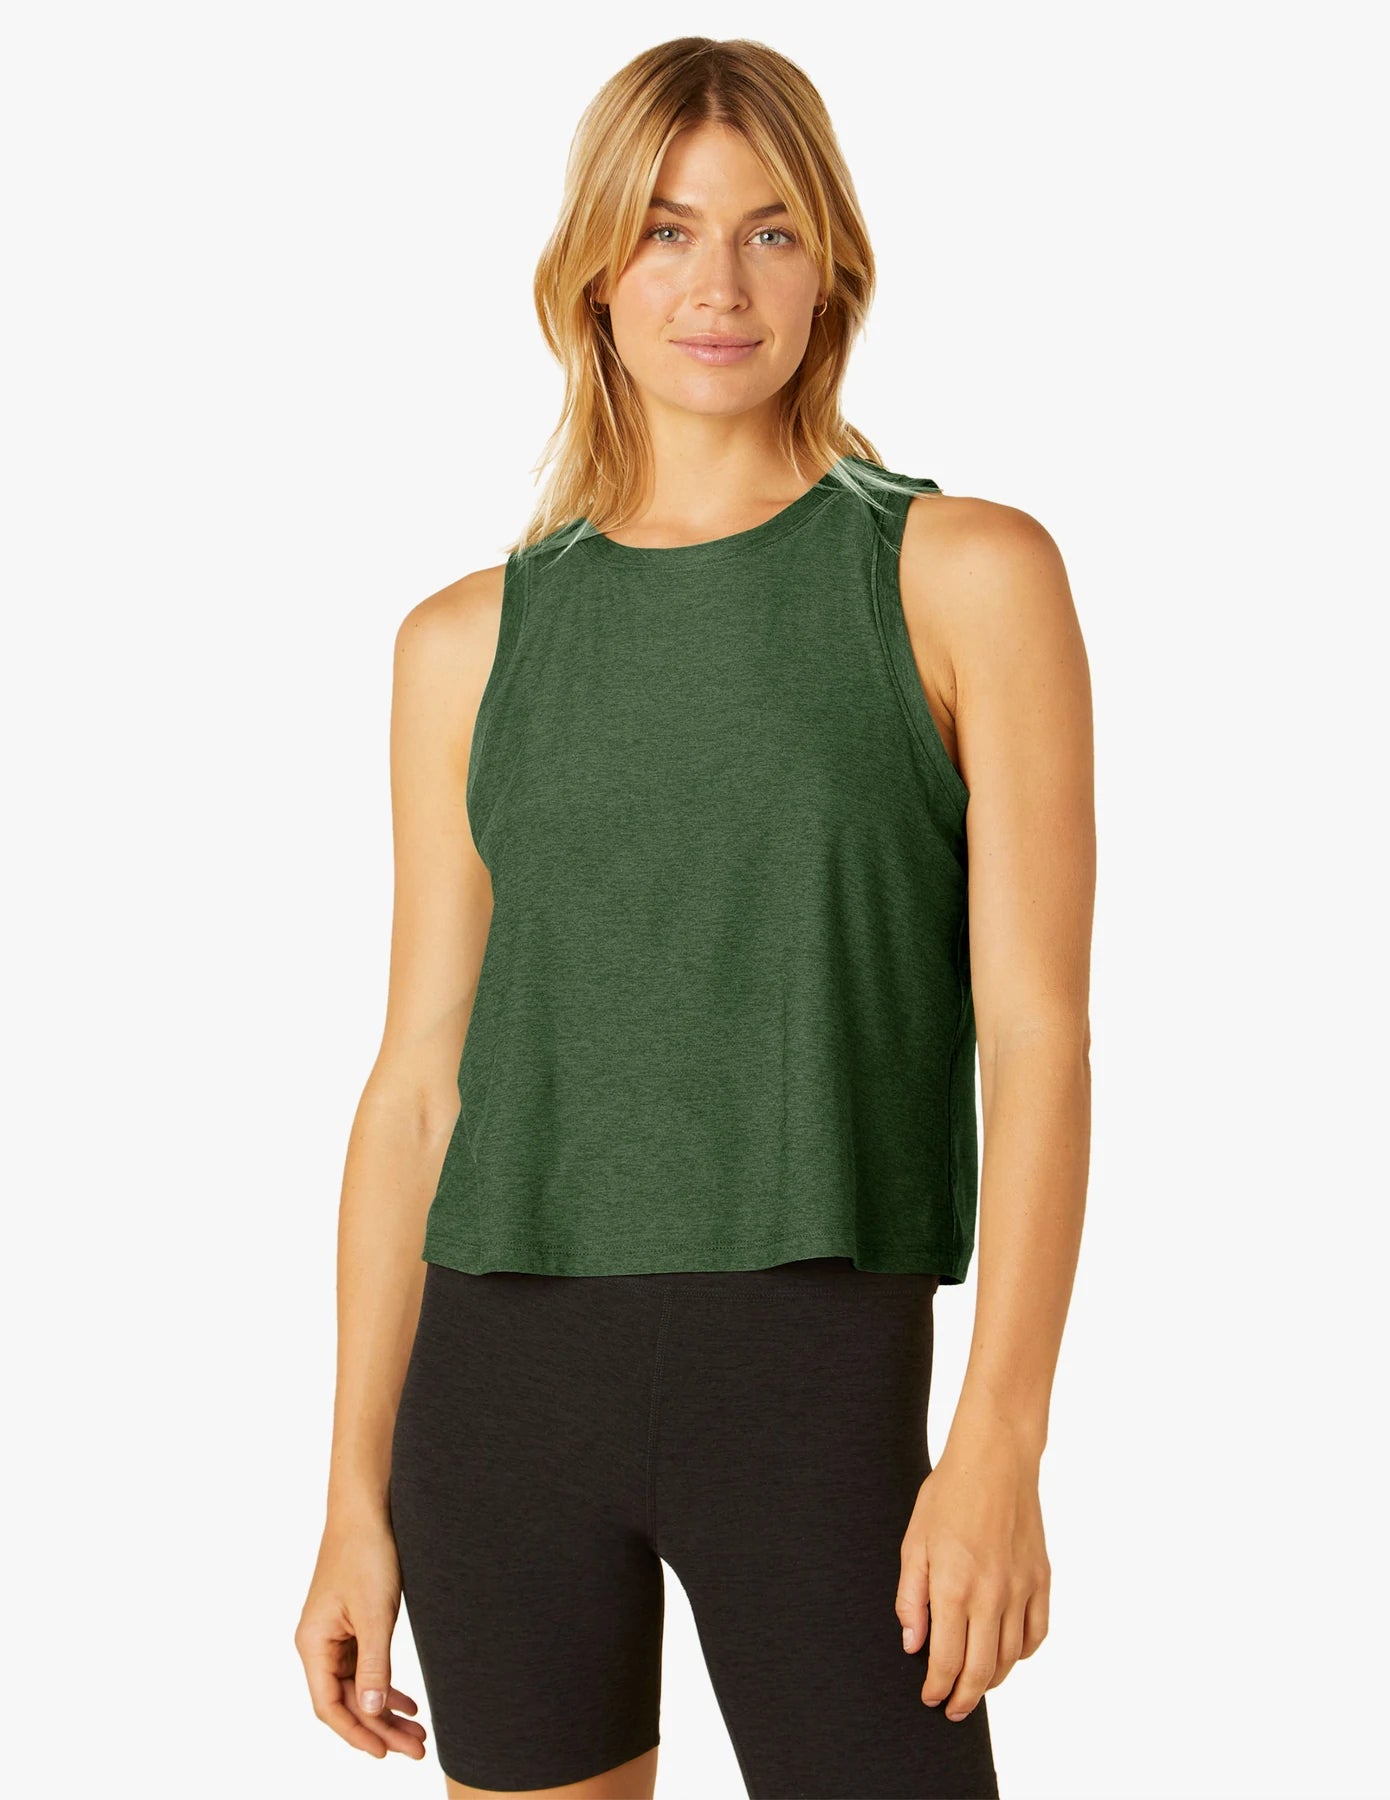 Meet your new favorite tank, the Beyond Yoga Featherweight Muscle Tank  is equal parts comfy and chic. Certainly falls into the both the fashion and performance category. Made from our ultra light Featherweight Spacedye fabric in a relaxed silhouette. You'll wear this from studio-to-street.